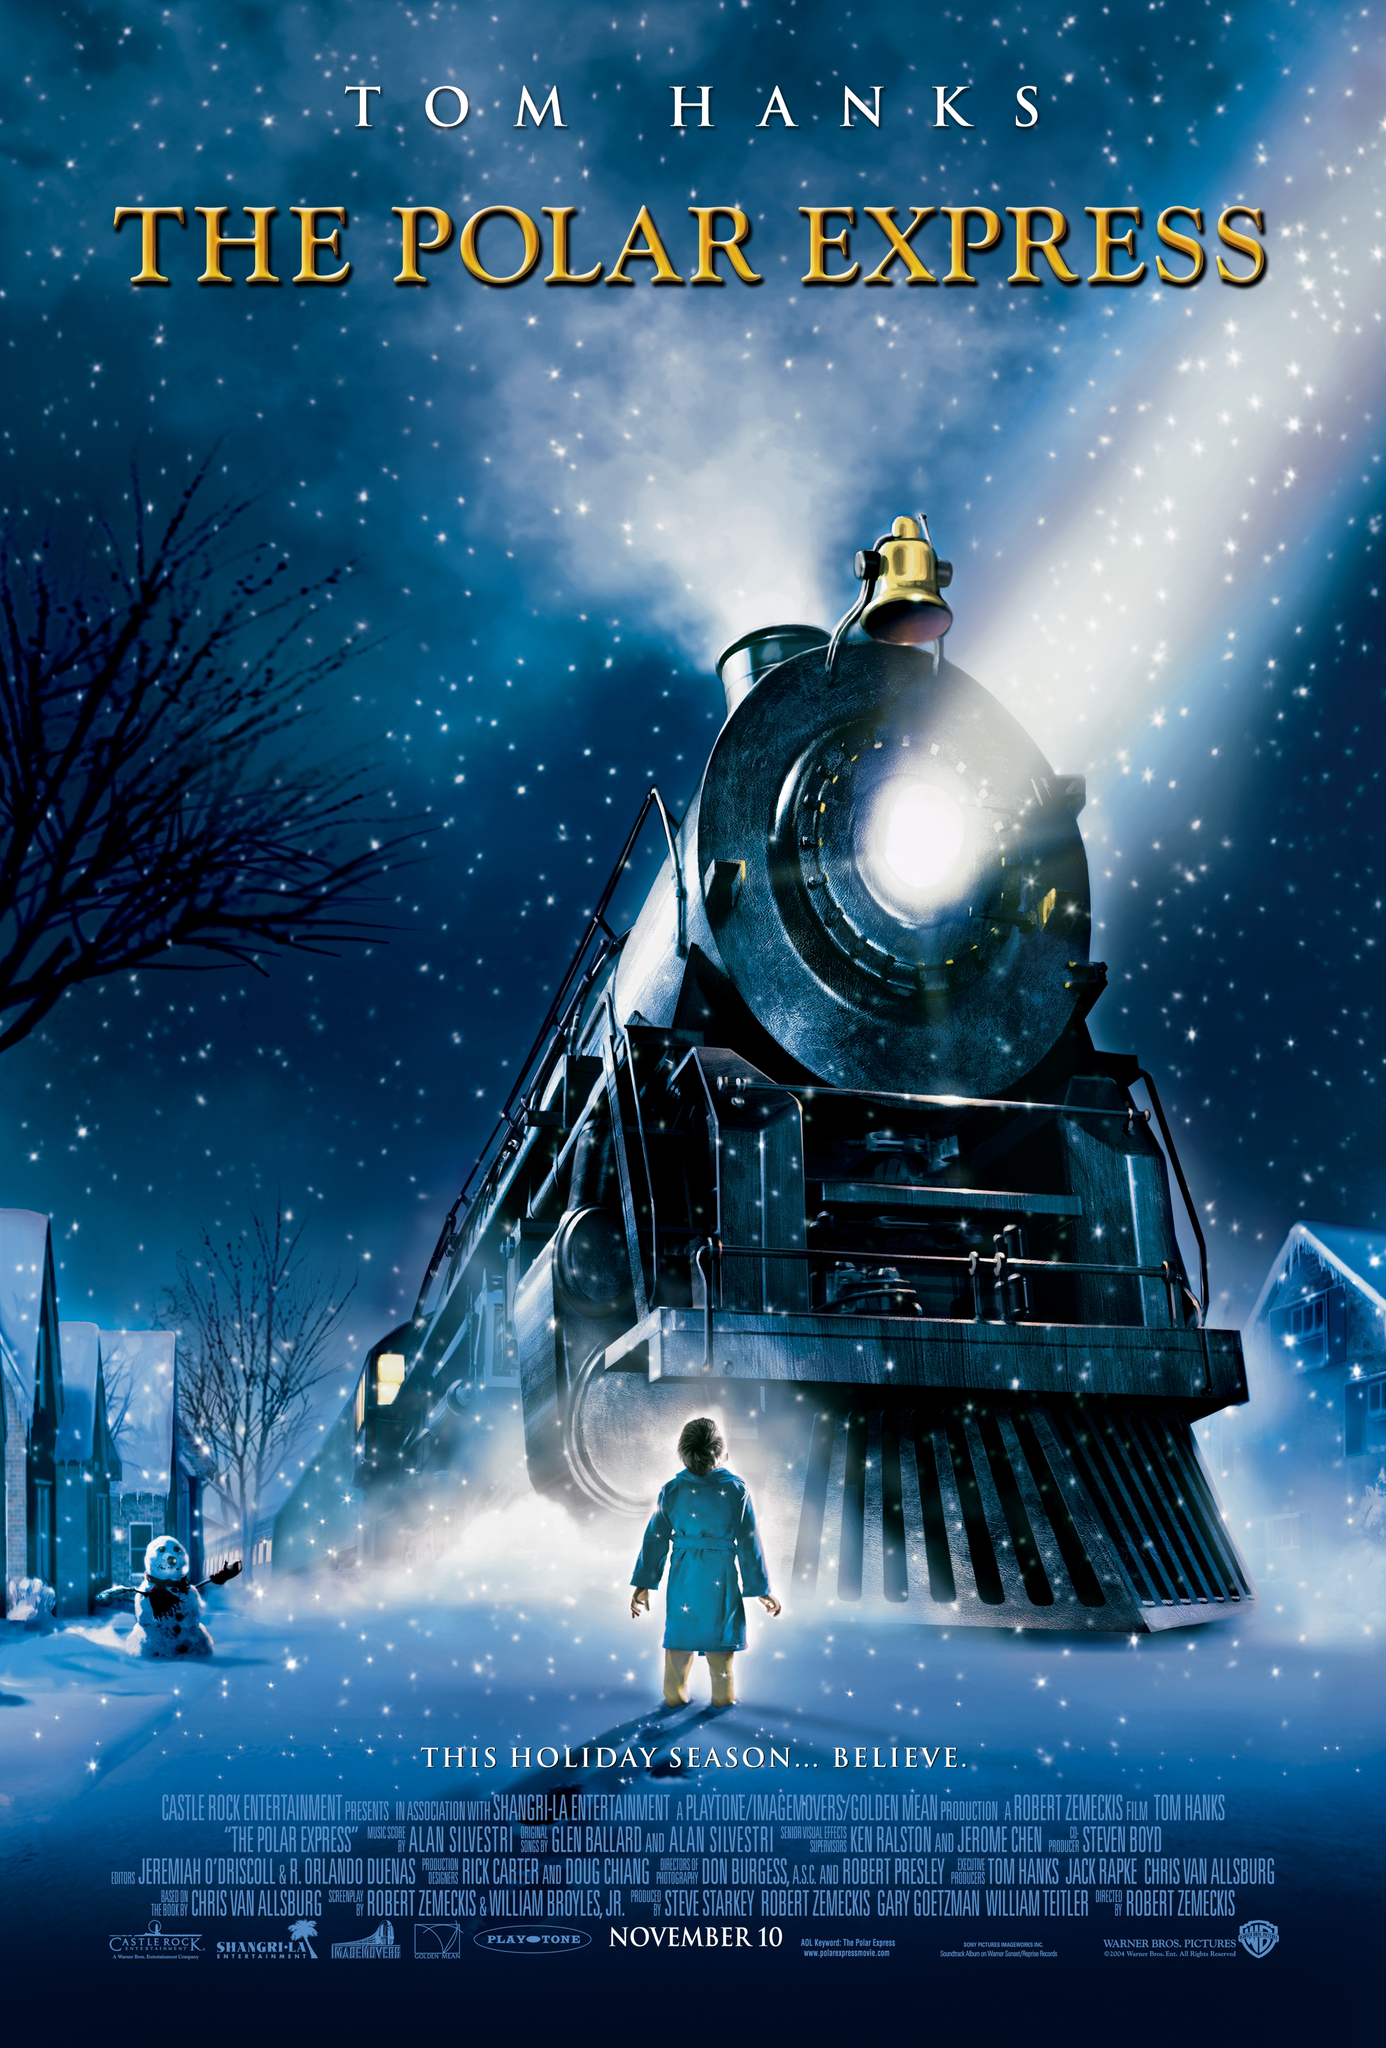 Best classic christmas movies - The Polar Express